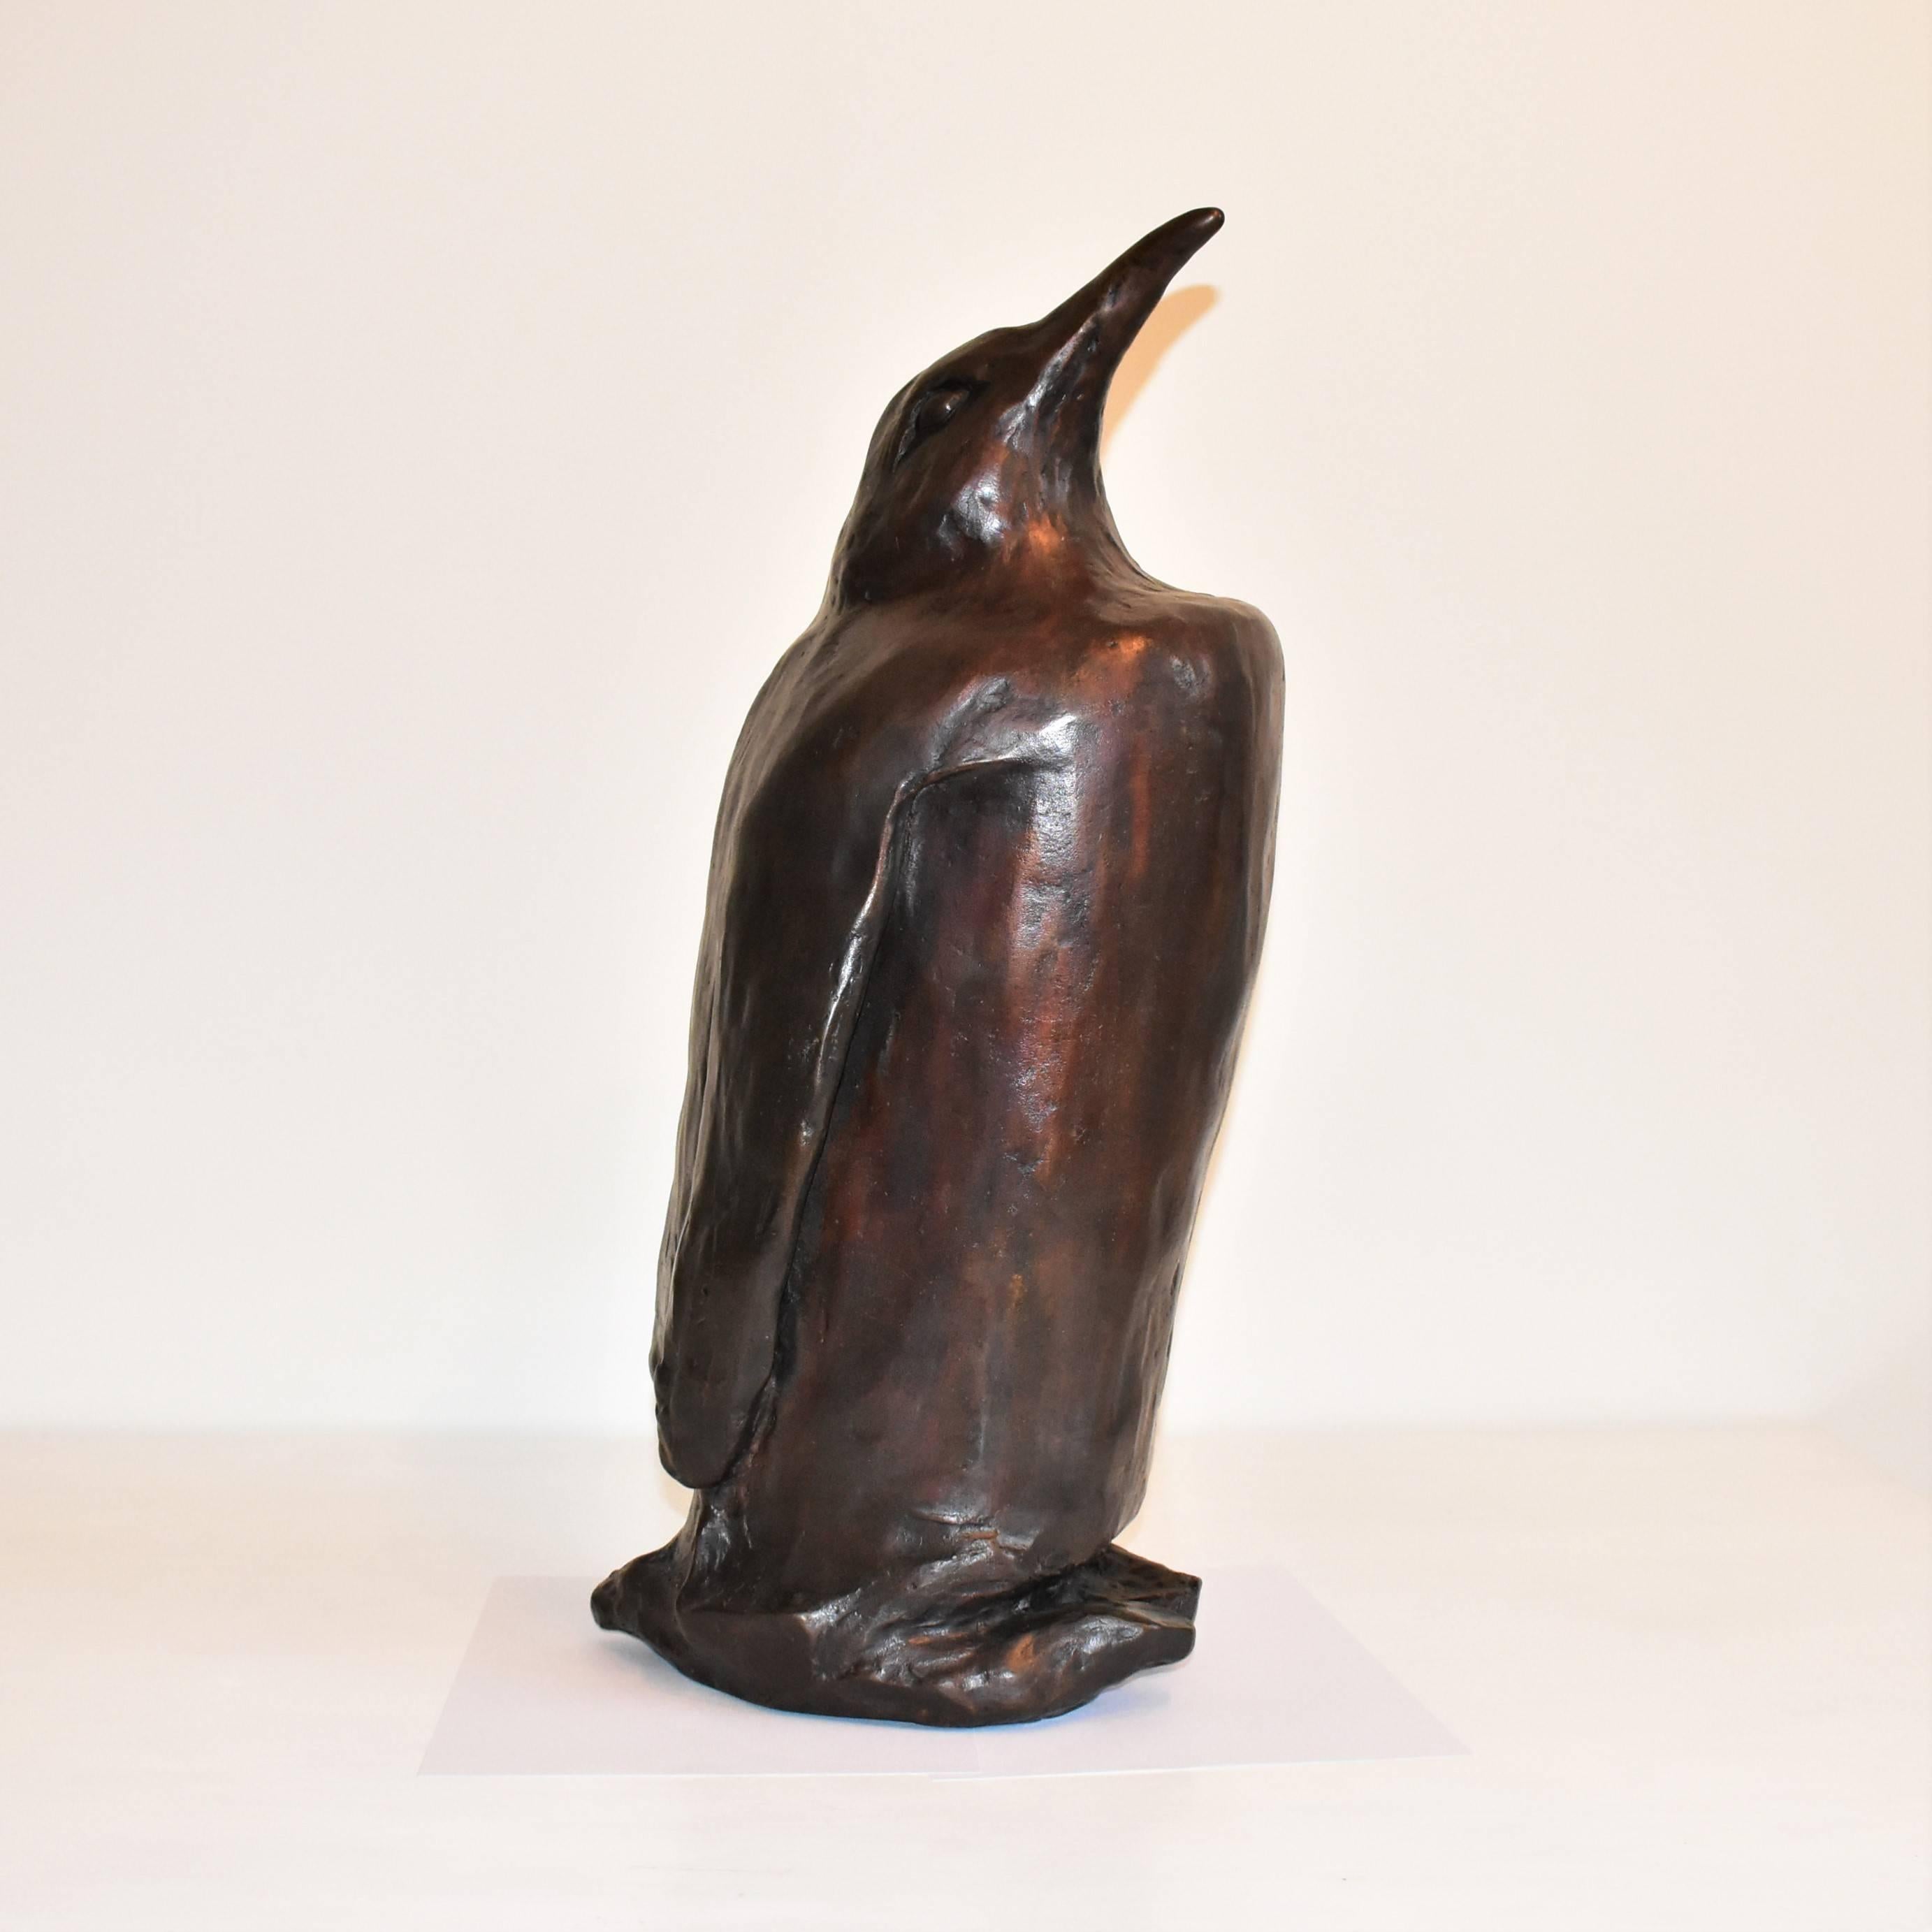 A modern artist created hand cast bronze sculpture of a large Penguin with a brownish black patina finish. Modernistic and artistic design capturing the essence of pride and strength and resilience with a broad chest and upturned beak. The artist of